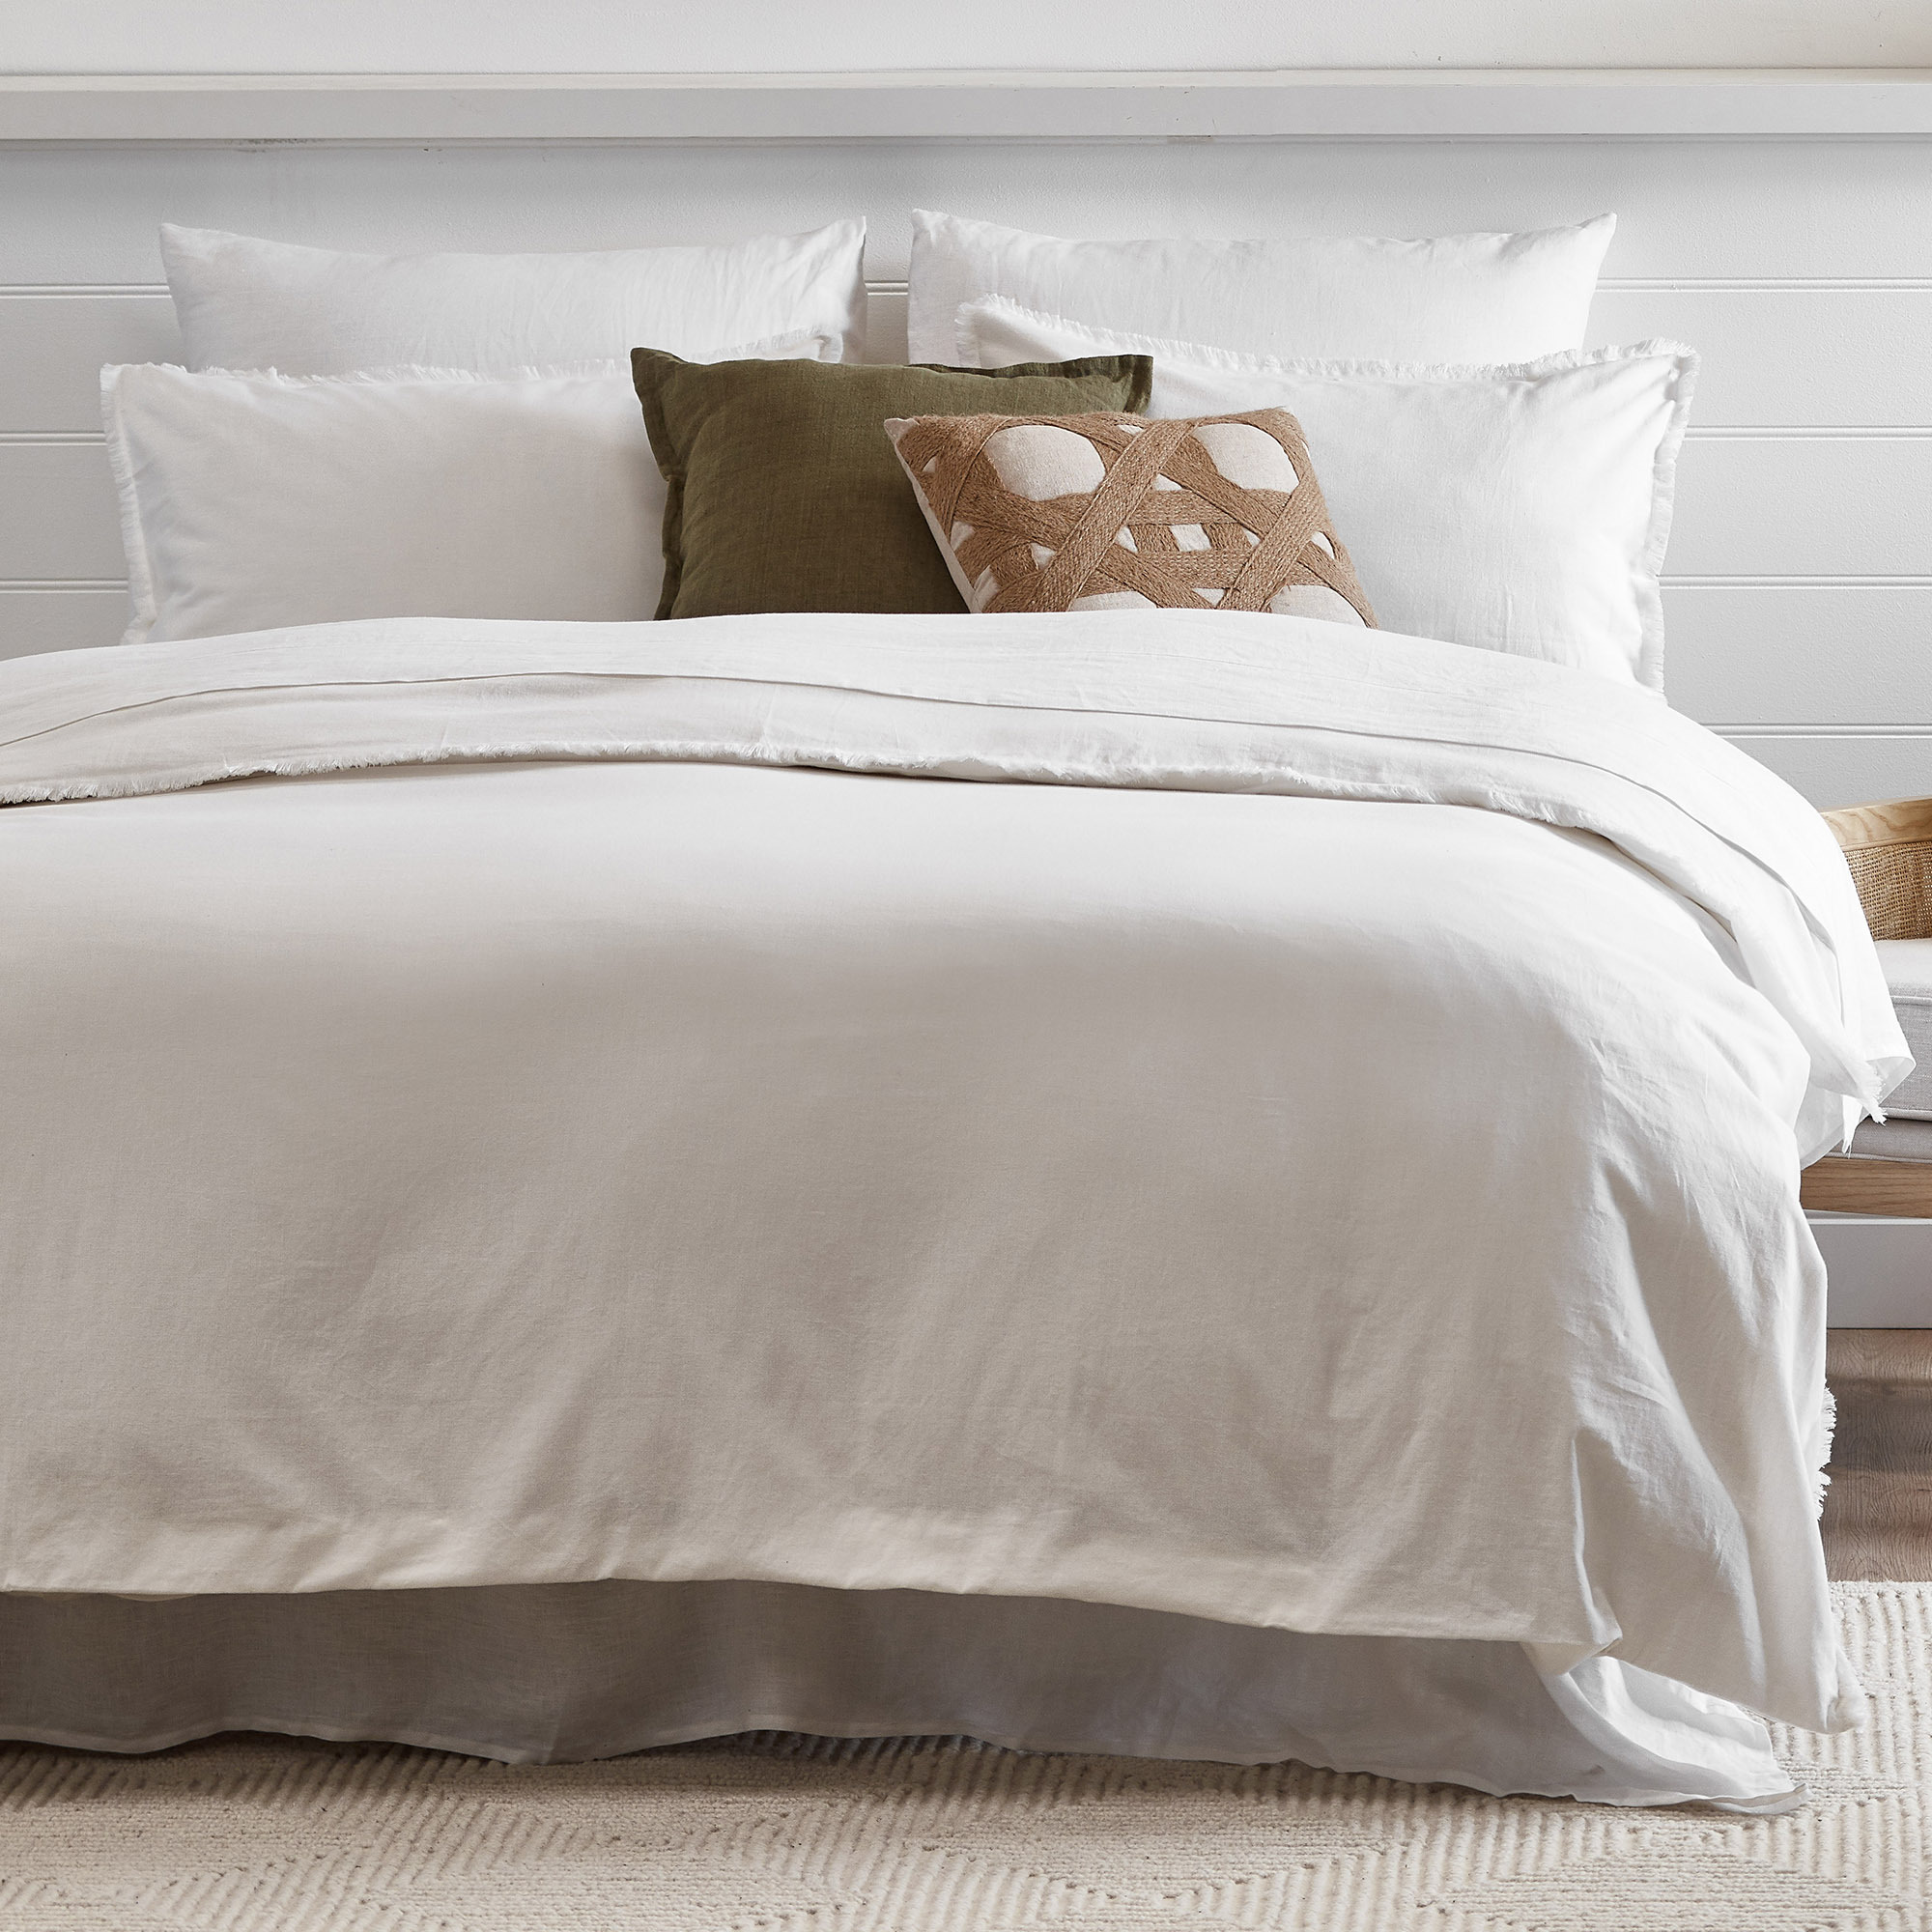 Temple Webster White Fringed Maia Cotton Linen Quilt Cover Set